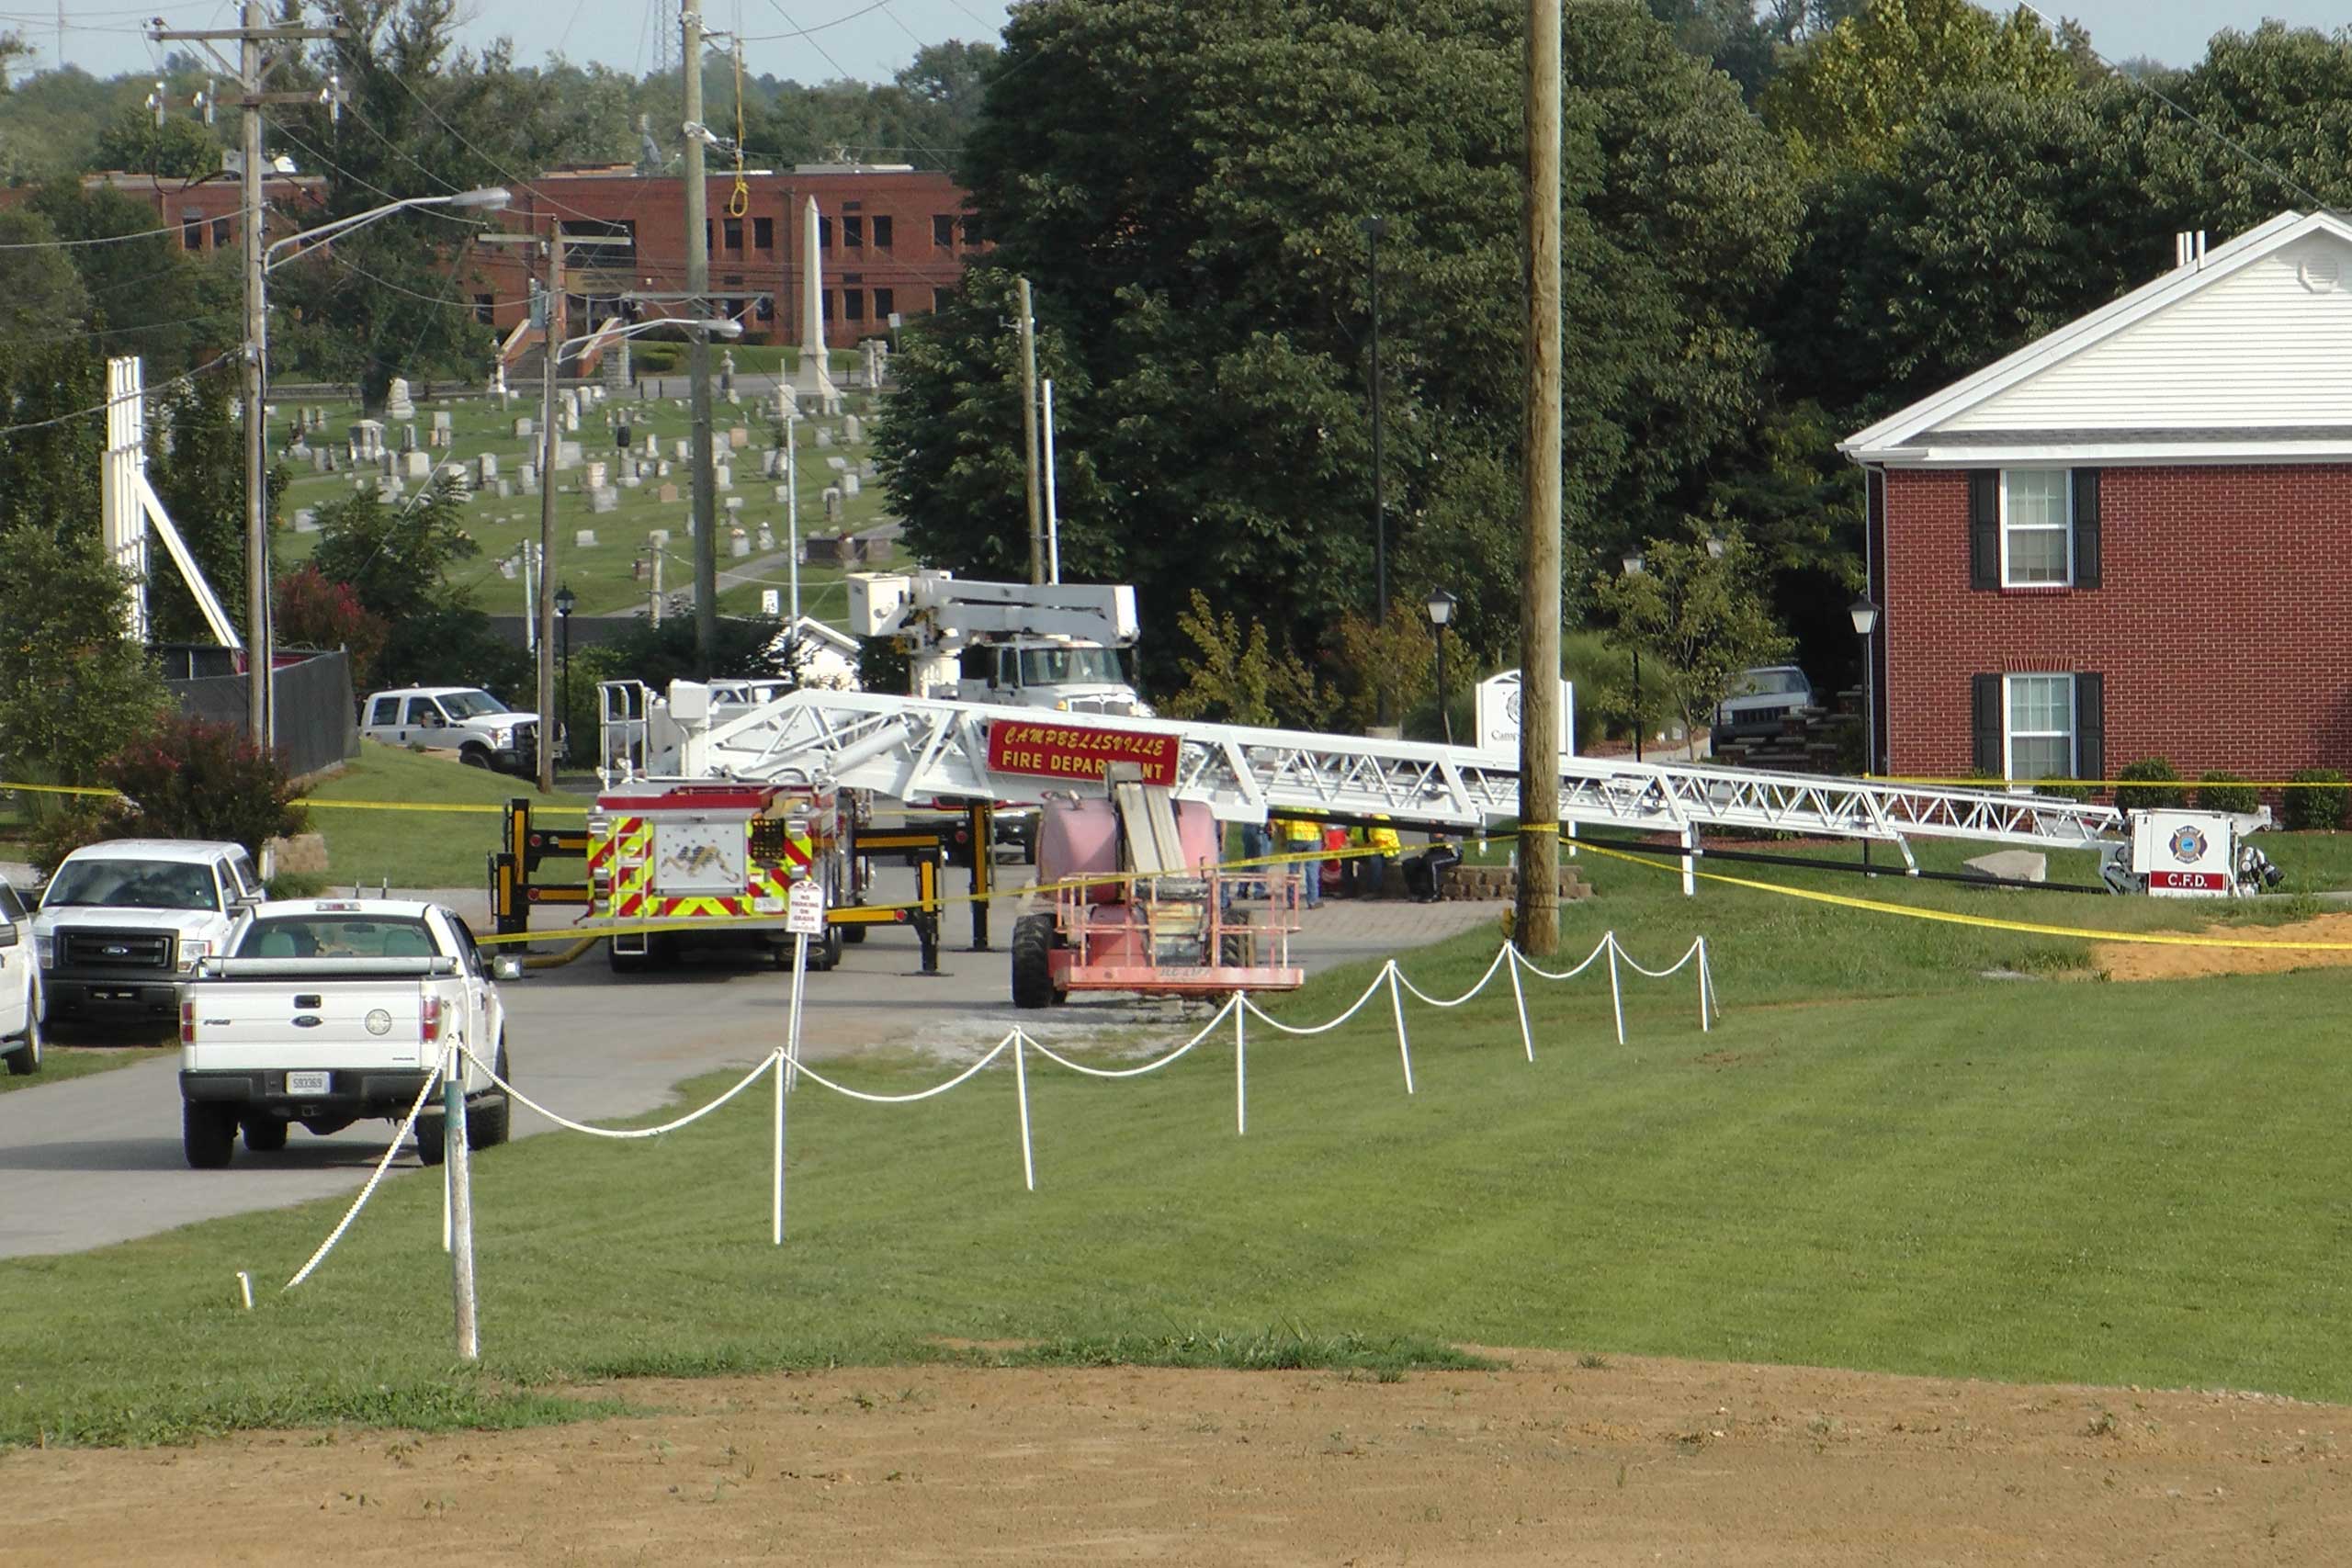 A Campbellsville Fire Department truck with the ladder extended remained at the scene where two firefighters were injured during an ice bucket challenge during a fundraiser for ALS on Thursday, Aug. 21, 2014, in Campbellsville, Ky. (Dylan Lovan&mdash;AP)